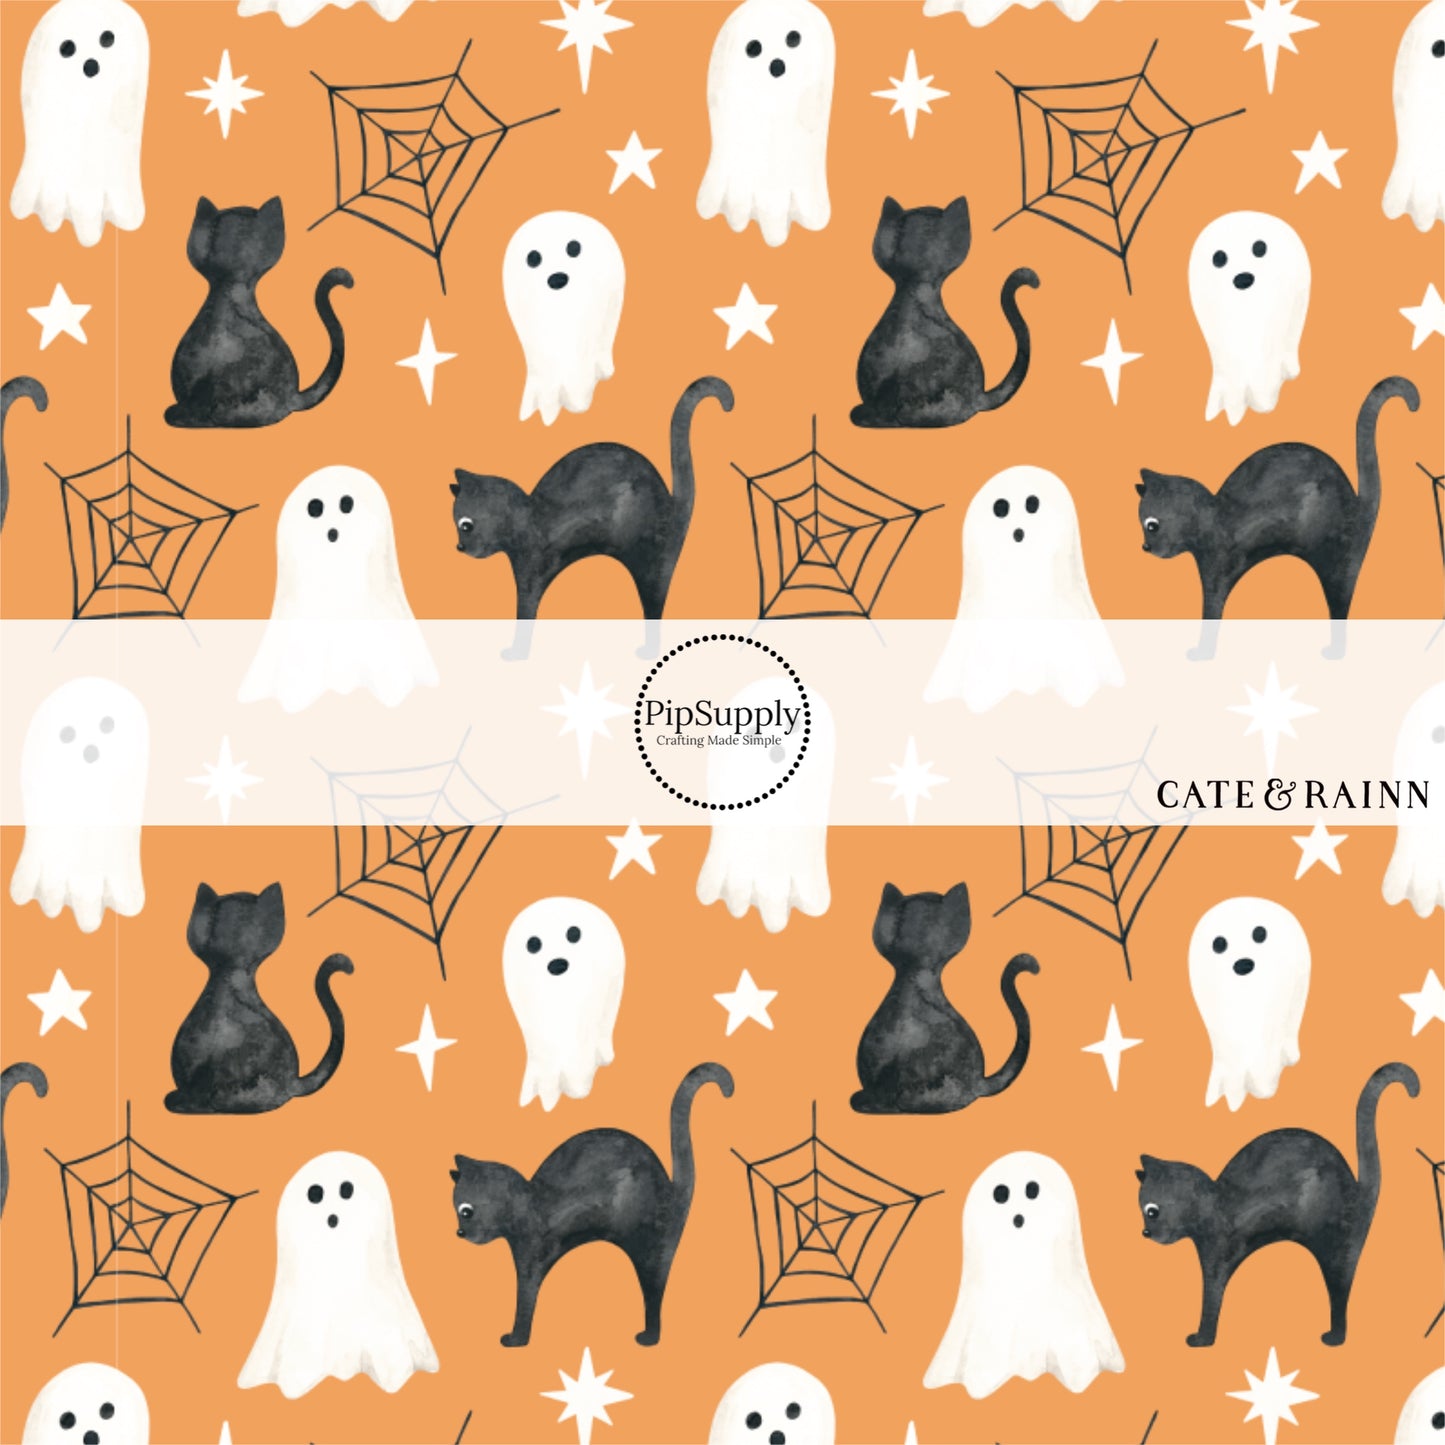 These Halloween themed orange fabric by the yard features black cats, ghost, spiderwebs, and small white stars on orange. This fun spooky themed fabric can be used for all your sewing and crafting needs! 